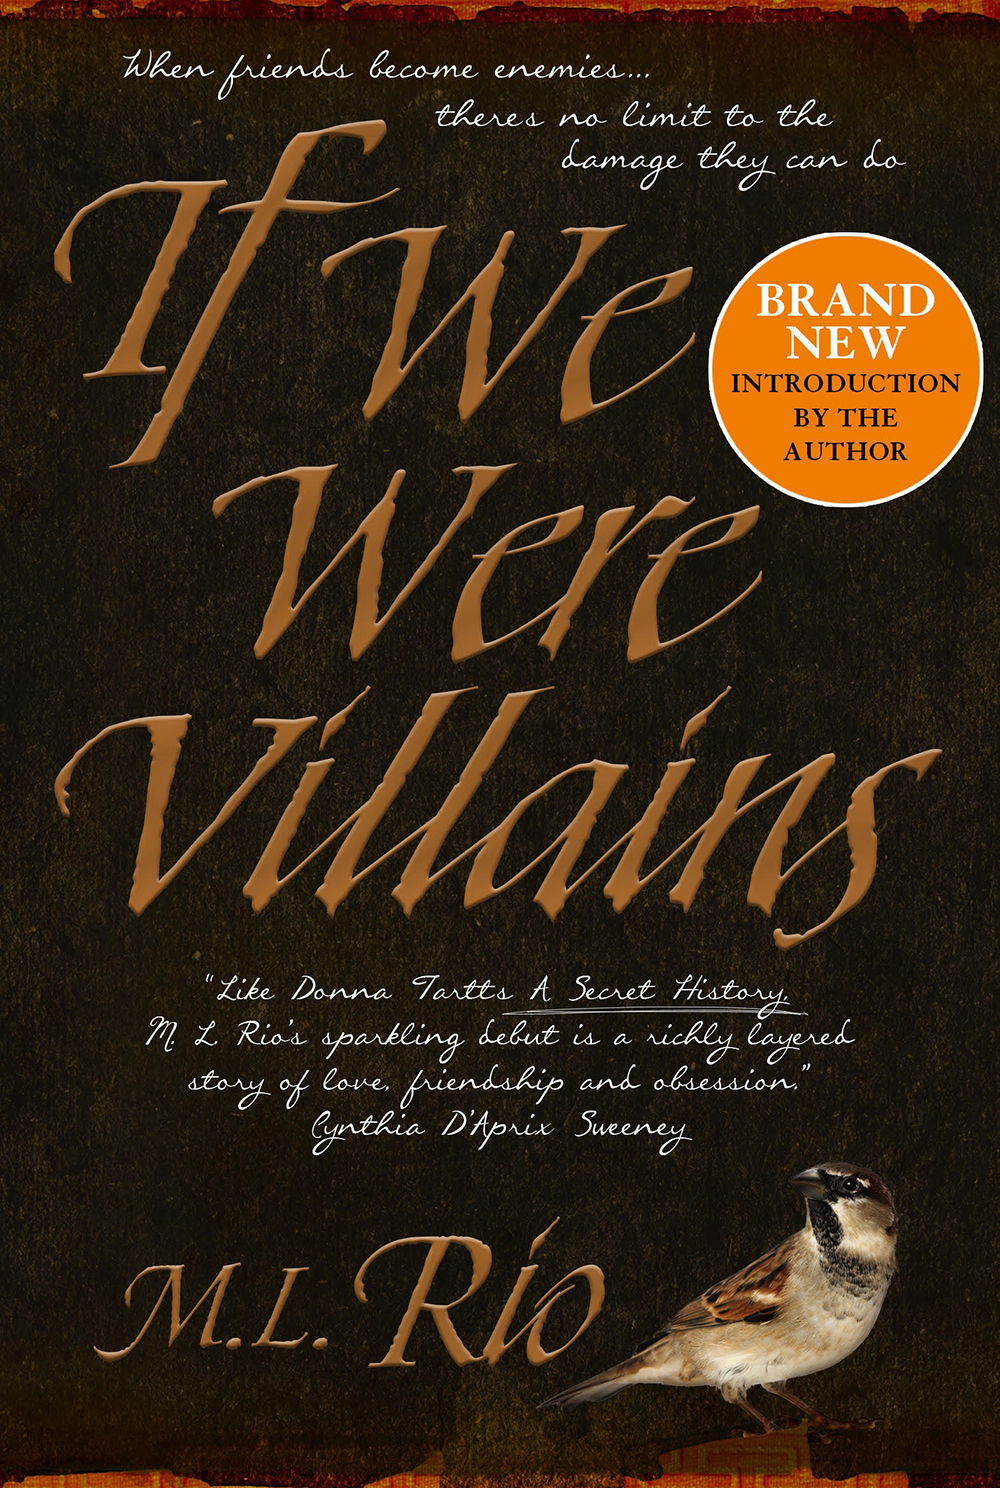 If We Were Villains - signed edition @ Titan Books